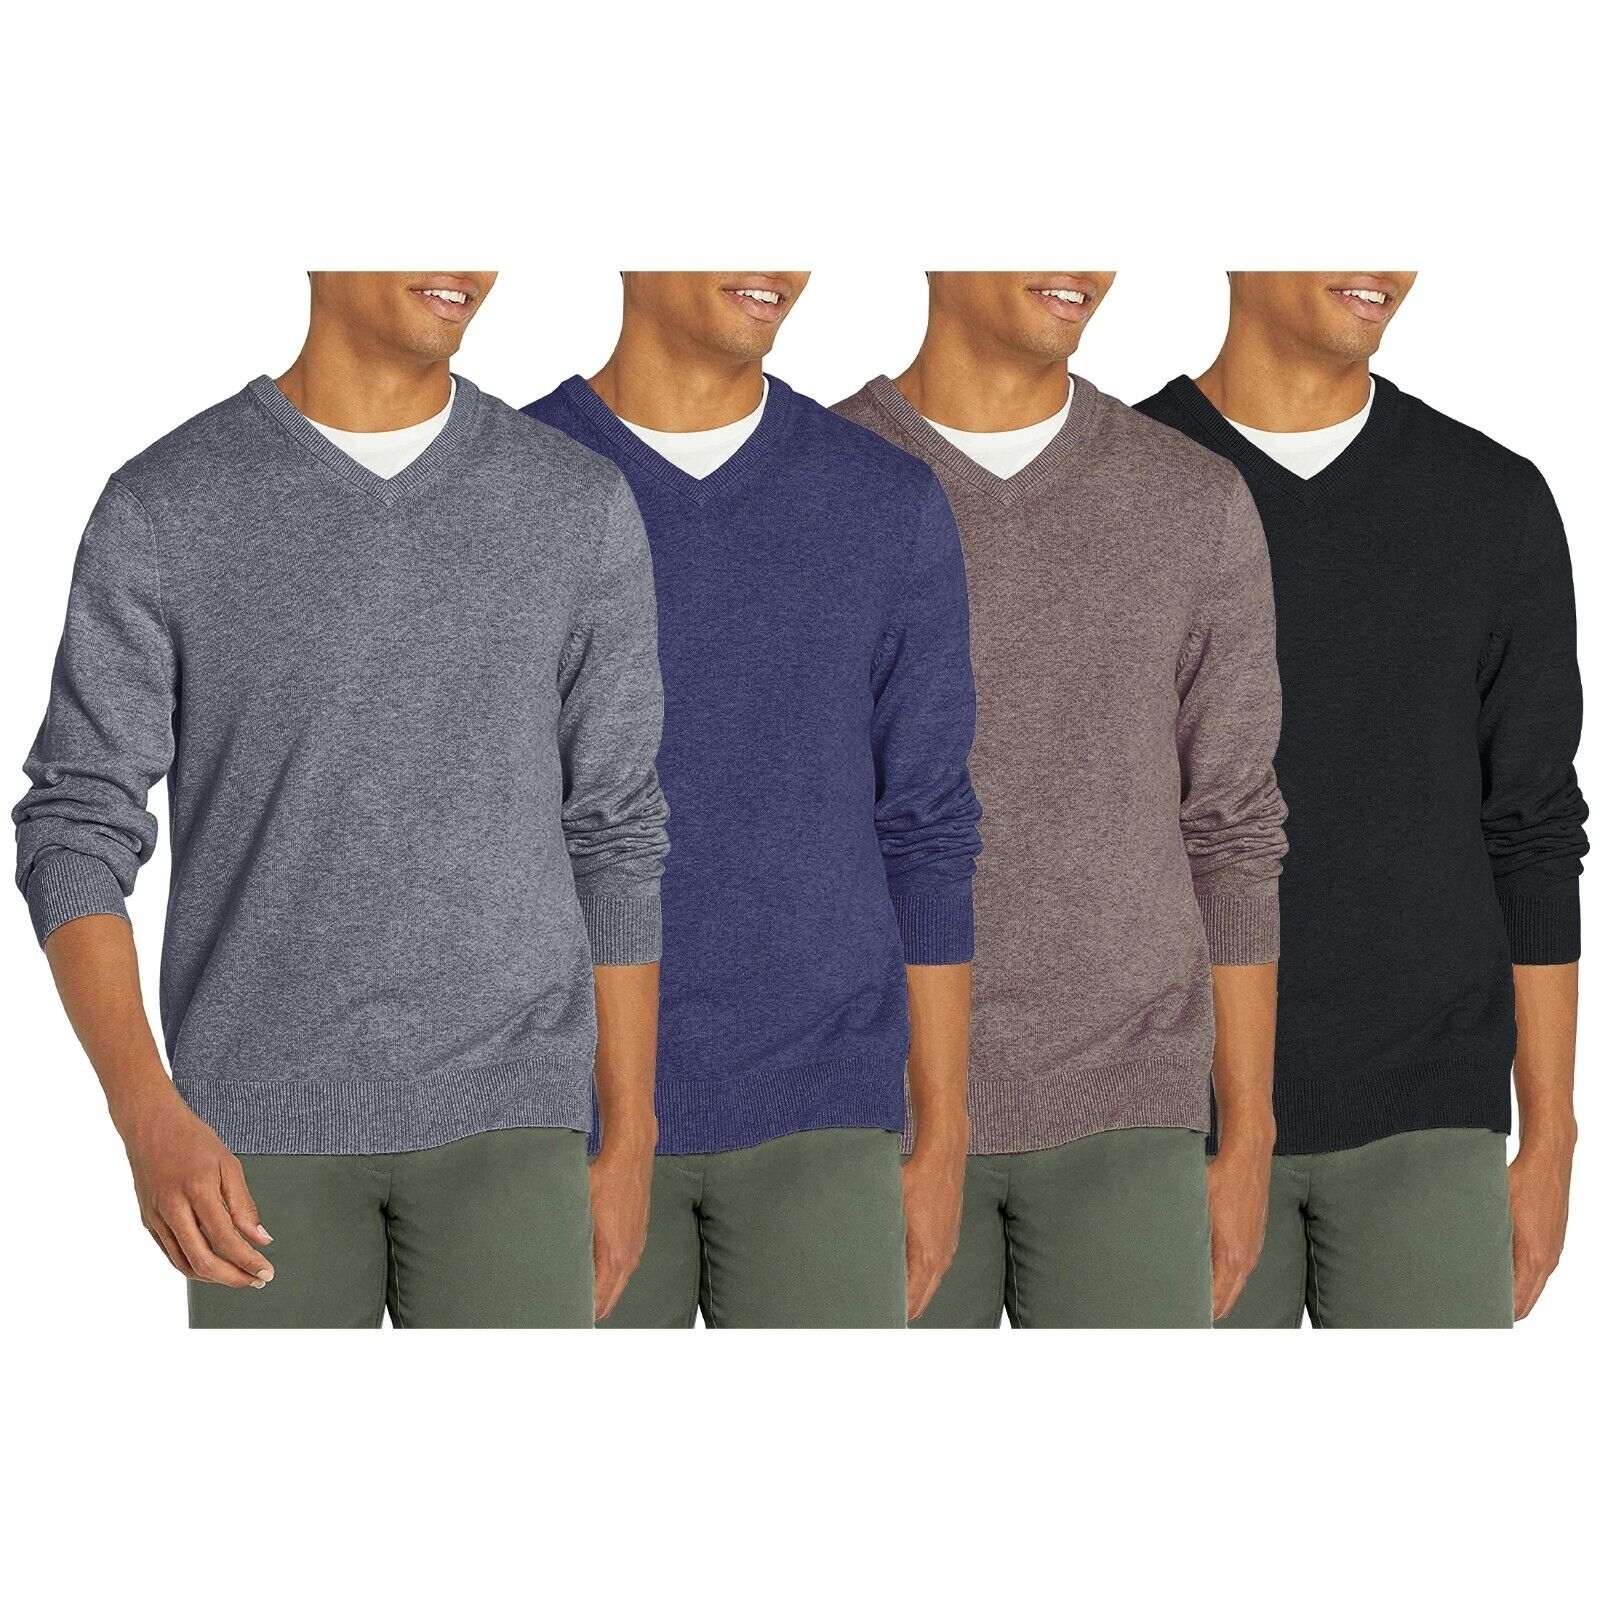 3-Pack Men's Casual Cozy Ultra Soft Slim Fit Warm Knit Pullover V-Neck Sweater - X-Large